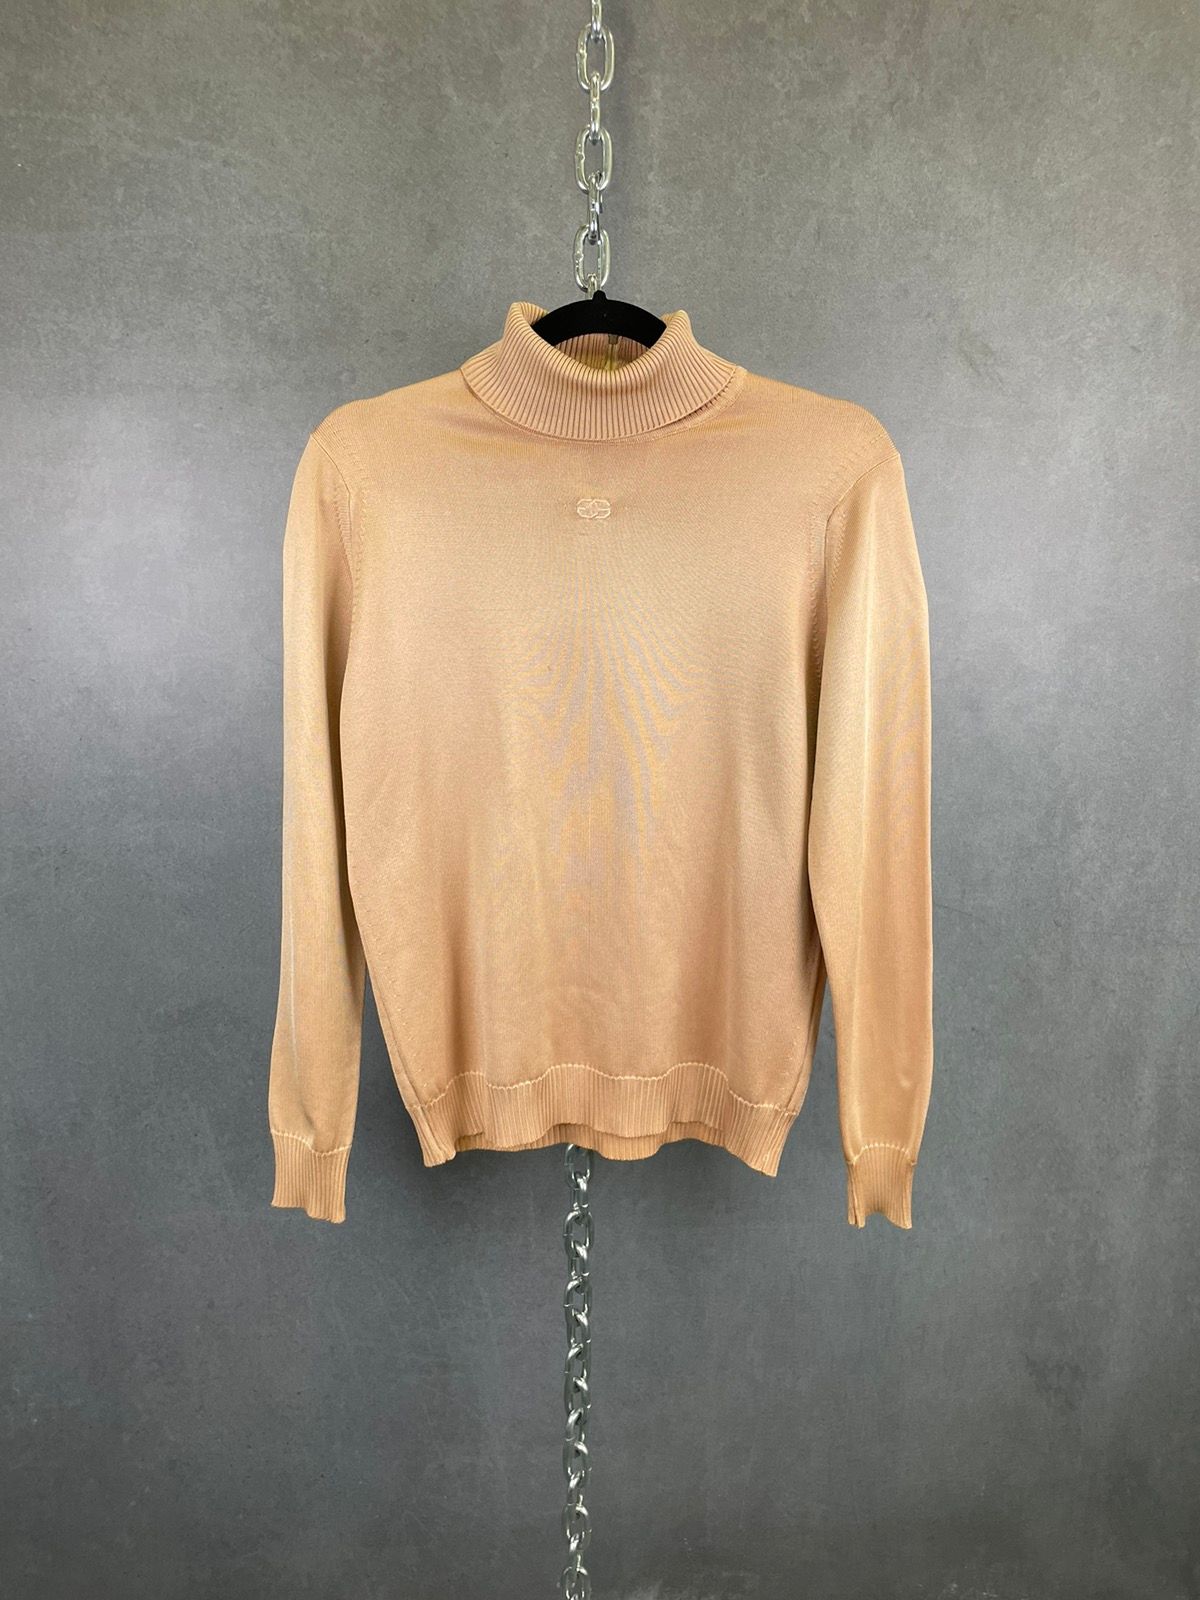 Givenchy Vintage 70s Givenchy Sport Tan Turtleneck Top Size 38 Size S / US 4 / IT 40 - 1 Preview